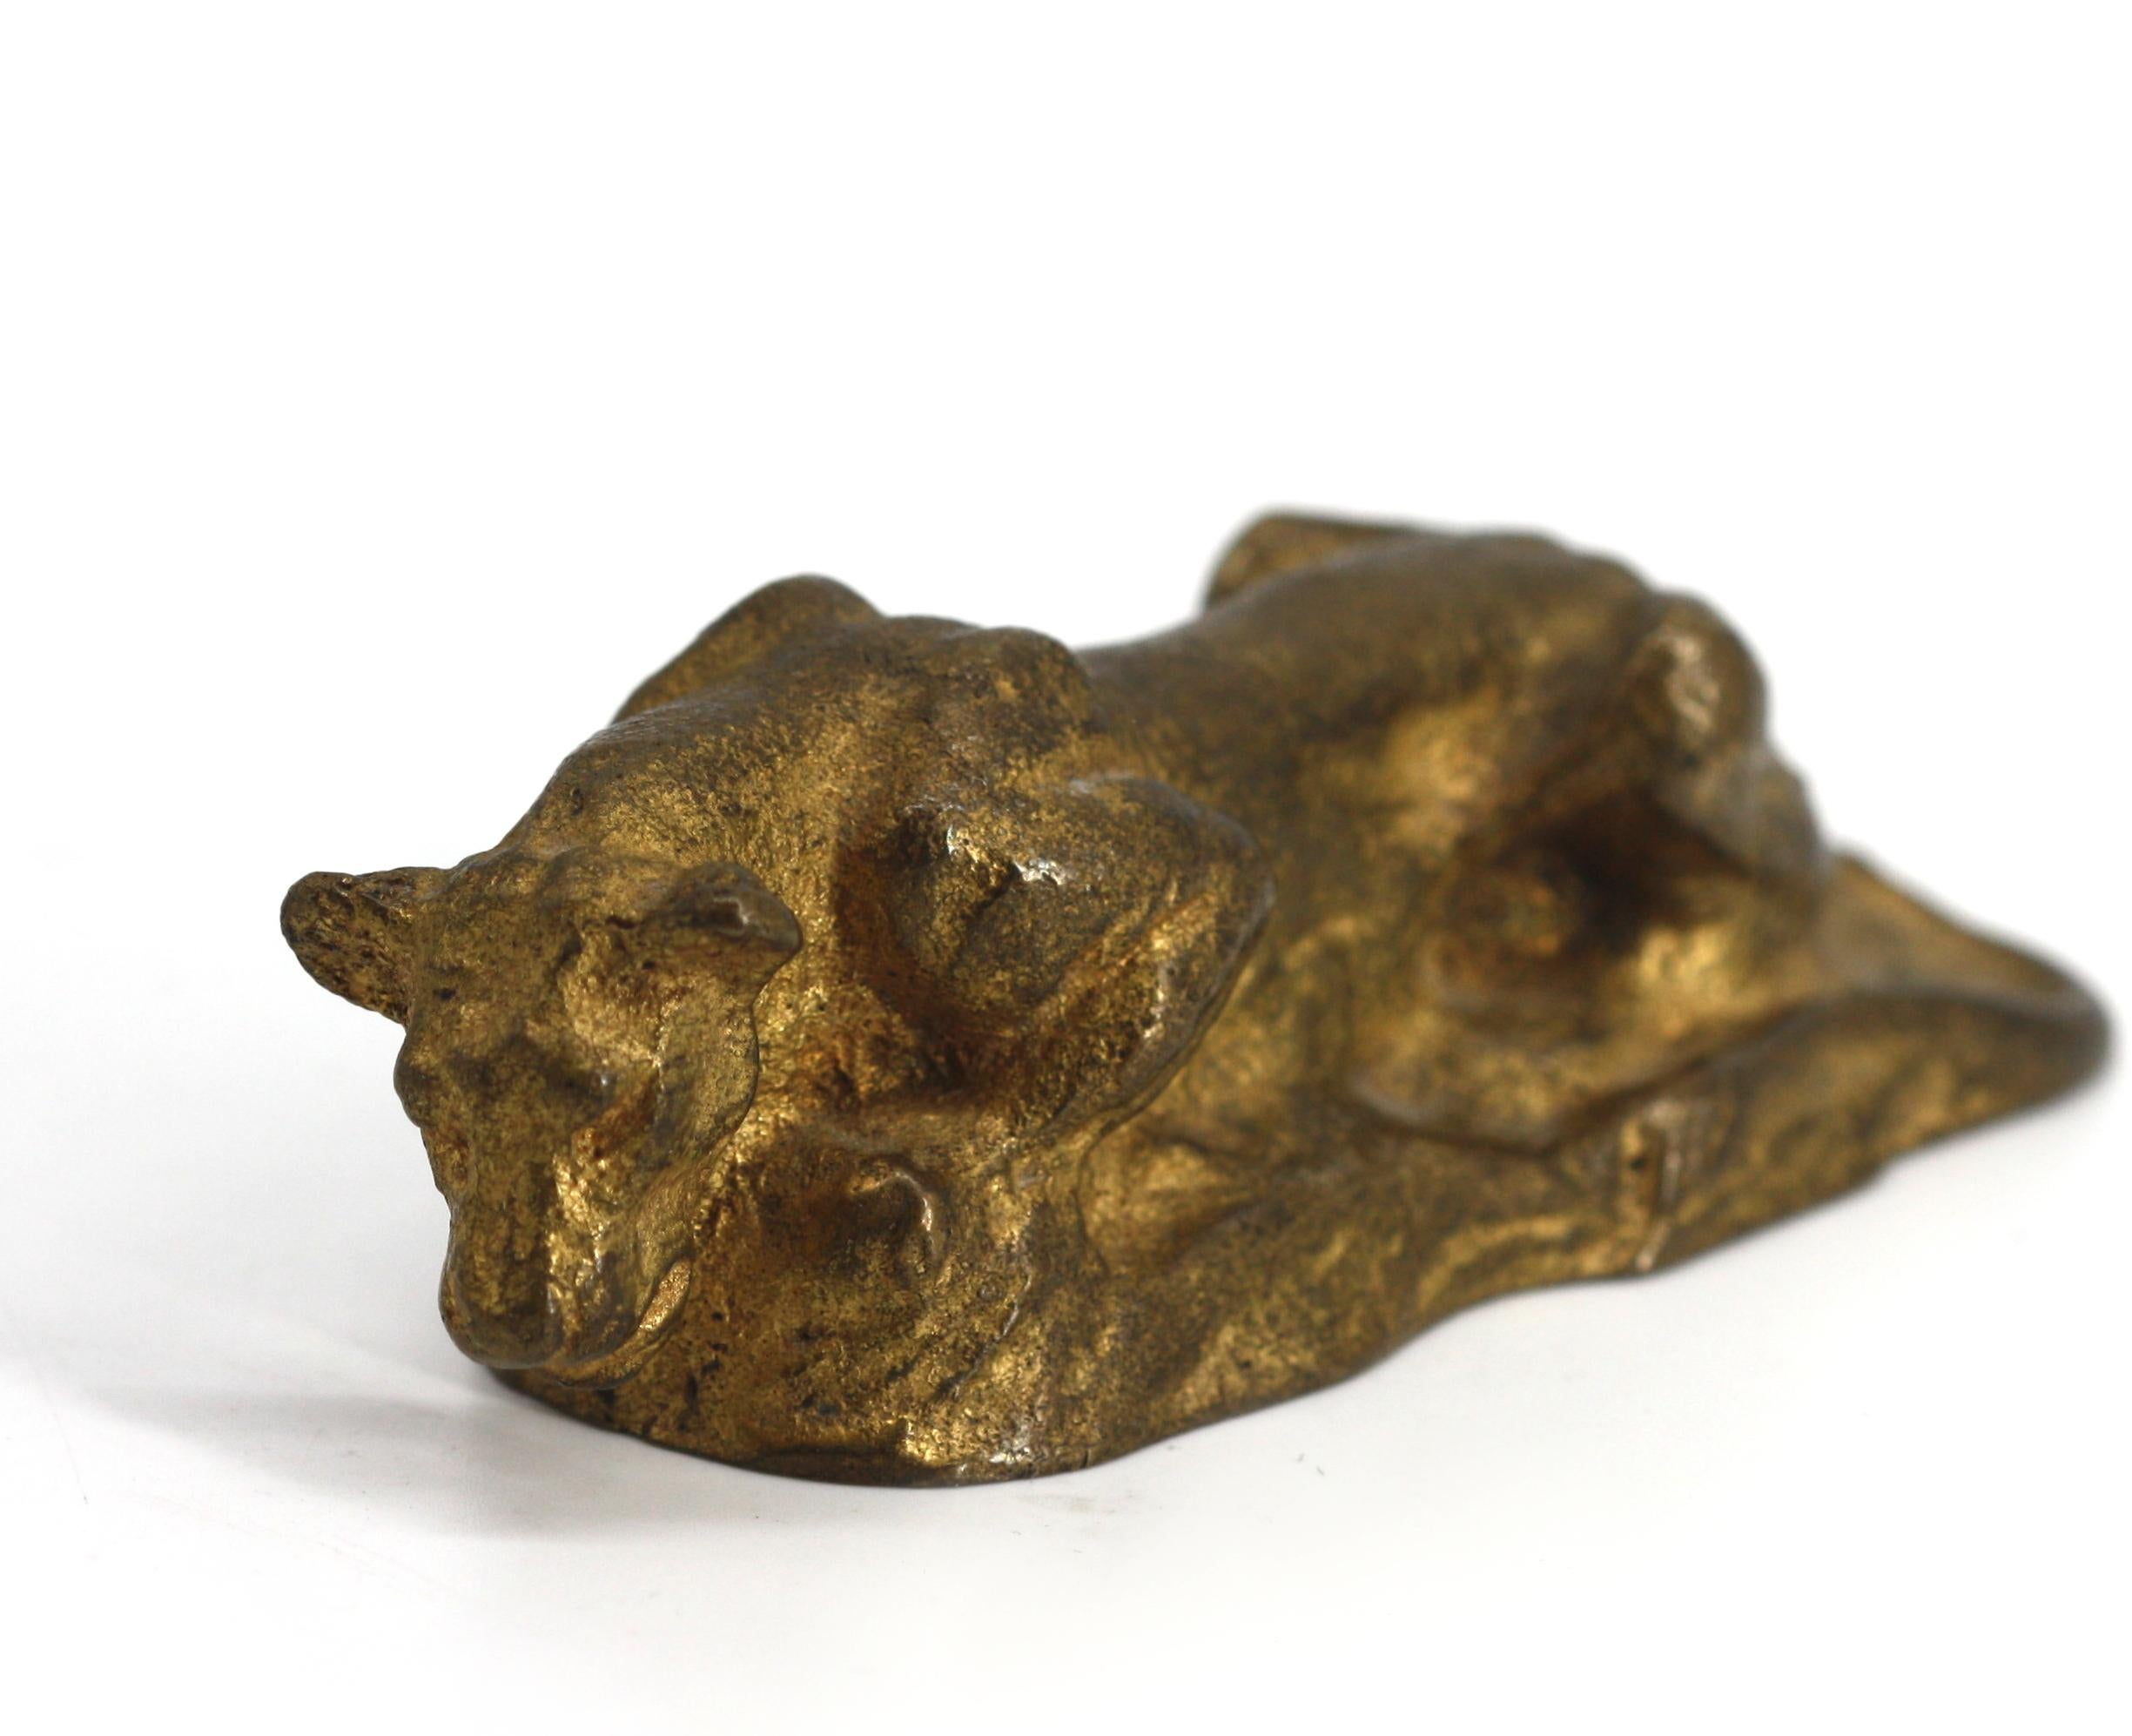  Tiffany Studios Gilt Bronze Lioness In Good Condition For Sale In West Palm Beach, FL